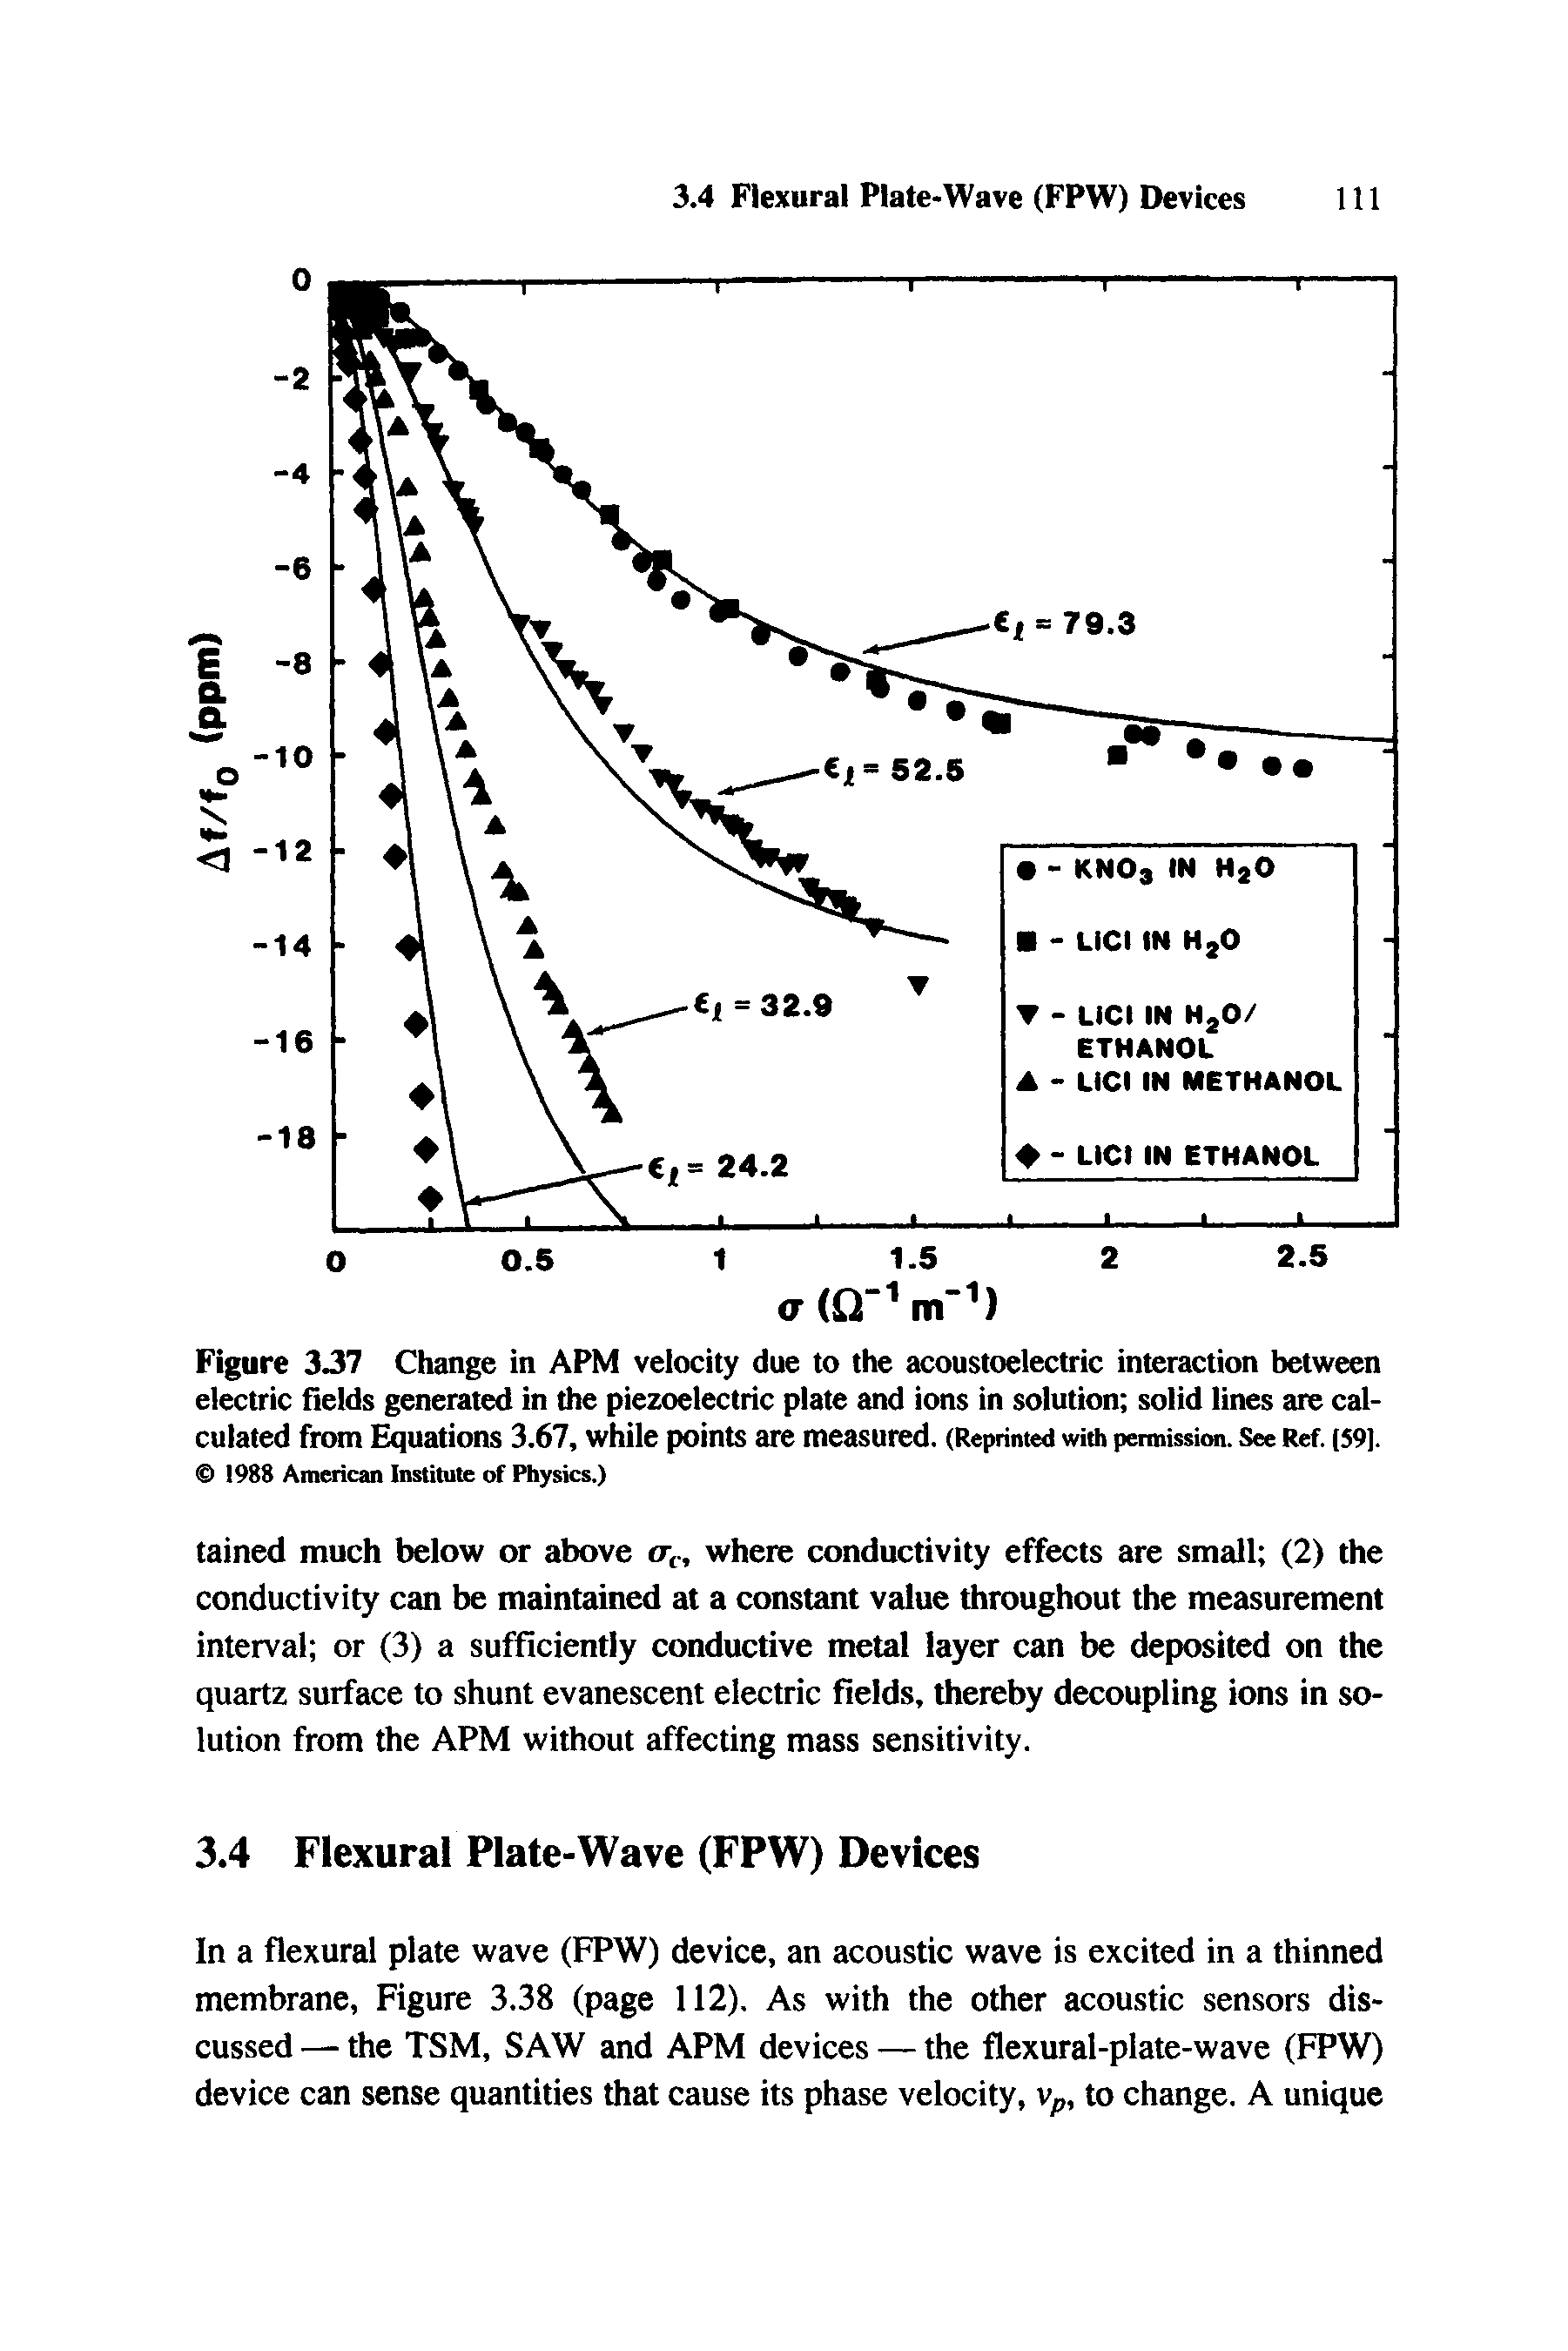 Figure 337 Change in APM velocity due to the acousloelectric interaction between electric fields generated in the piezoelectric plate and ions in solution solid lines are calculated from Equations 3.67, while points are measured. (Reprinted with pennission. See Ref. (S9]. 1988 American Inslitute of Physics.)...